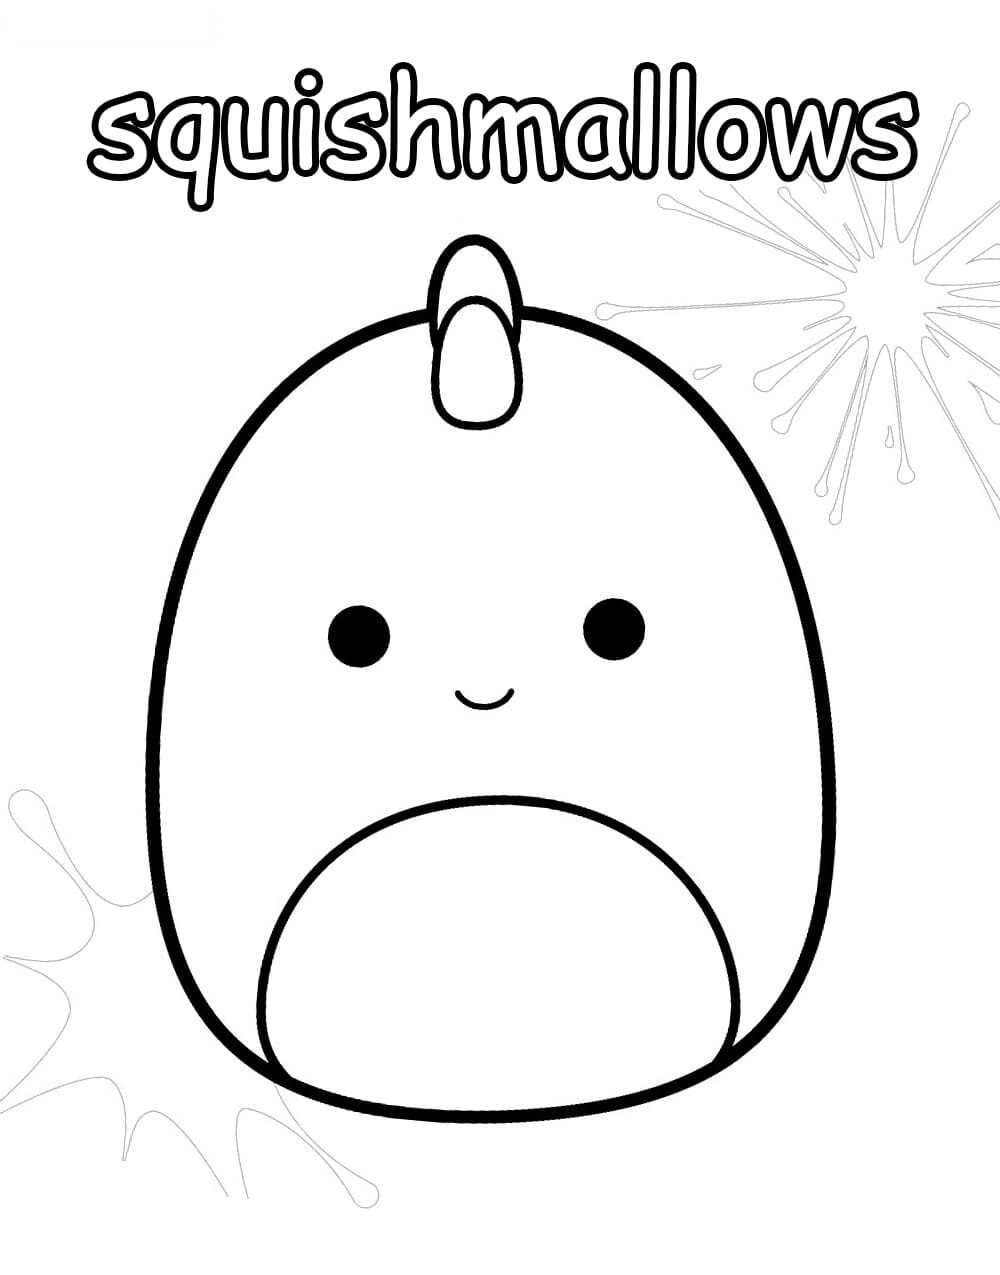 Squishmallows Coloring Pages Printable Family Fun Claire S Us So